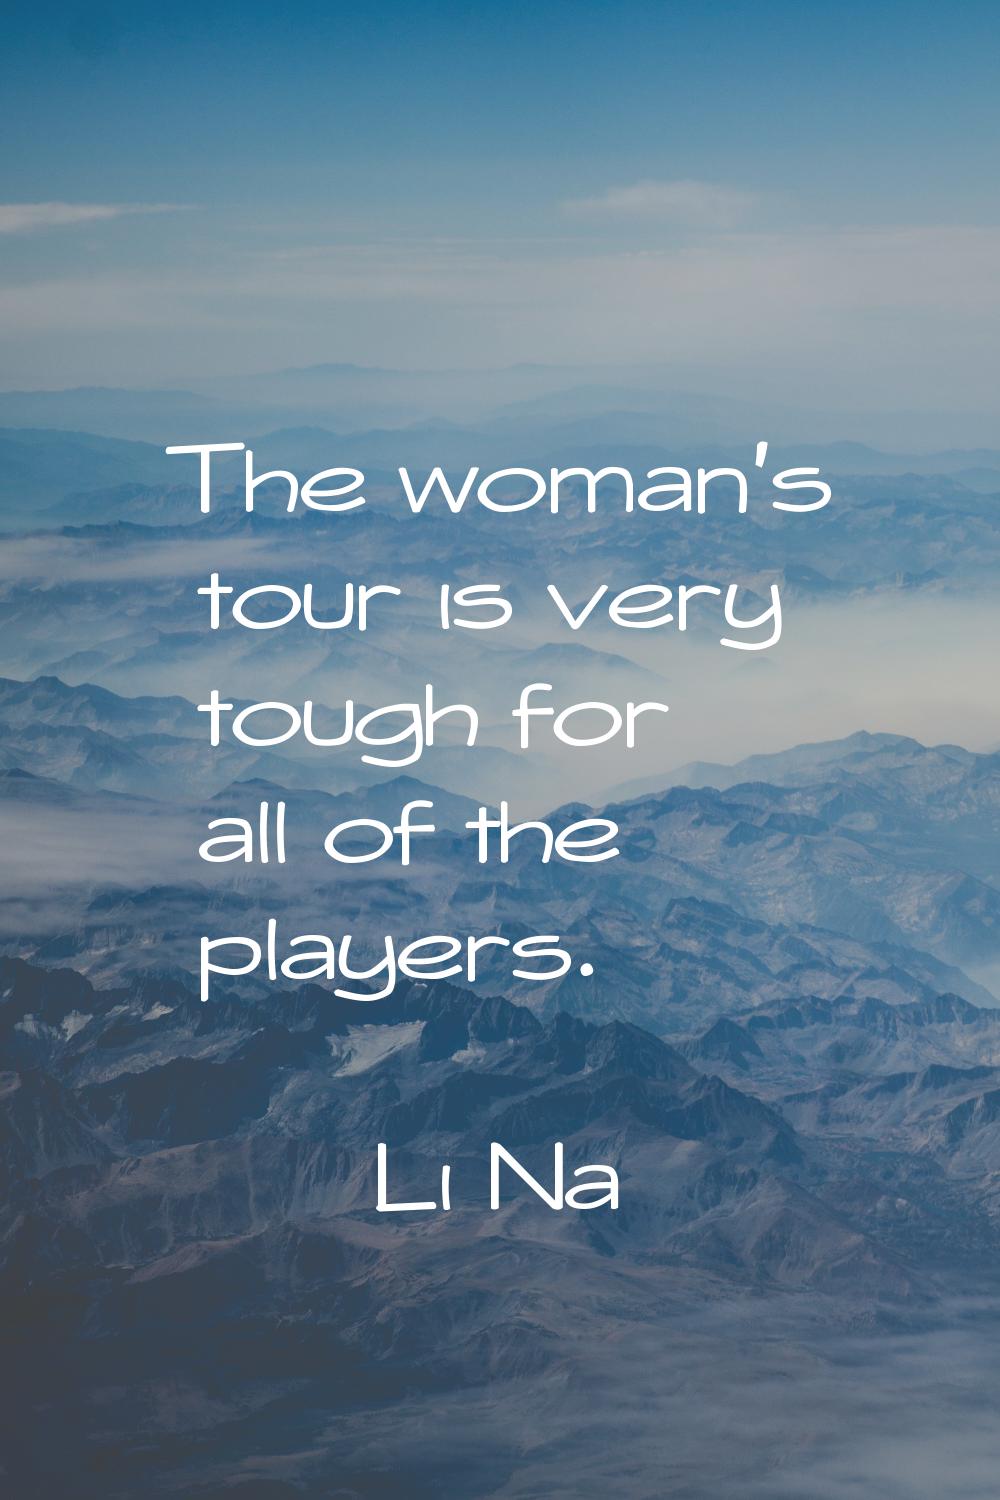 The woman's tour is very tough for all of the players.